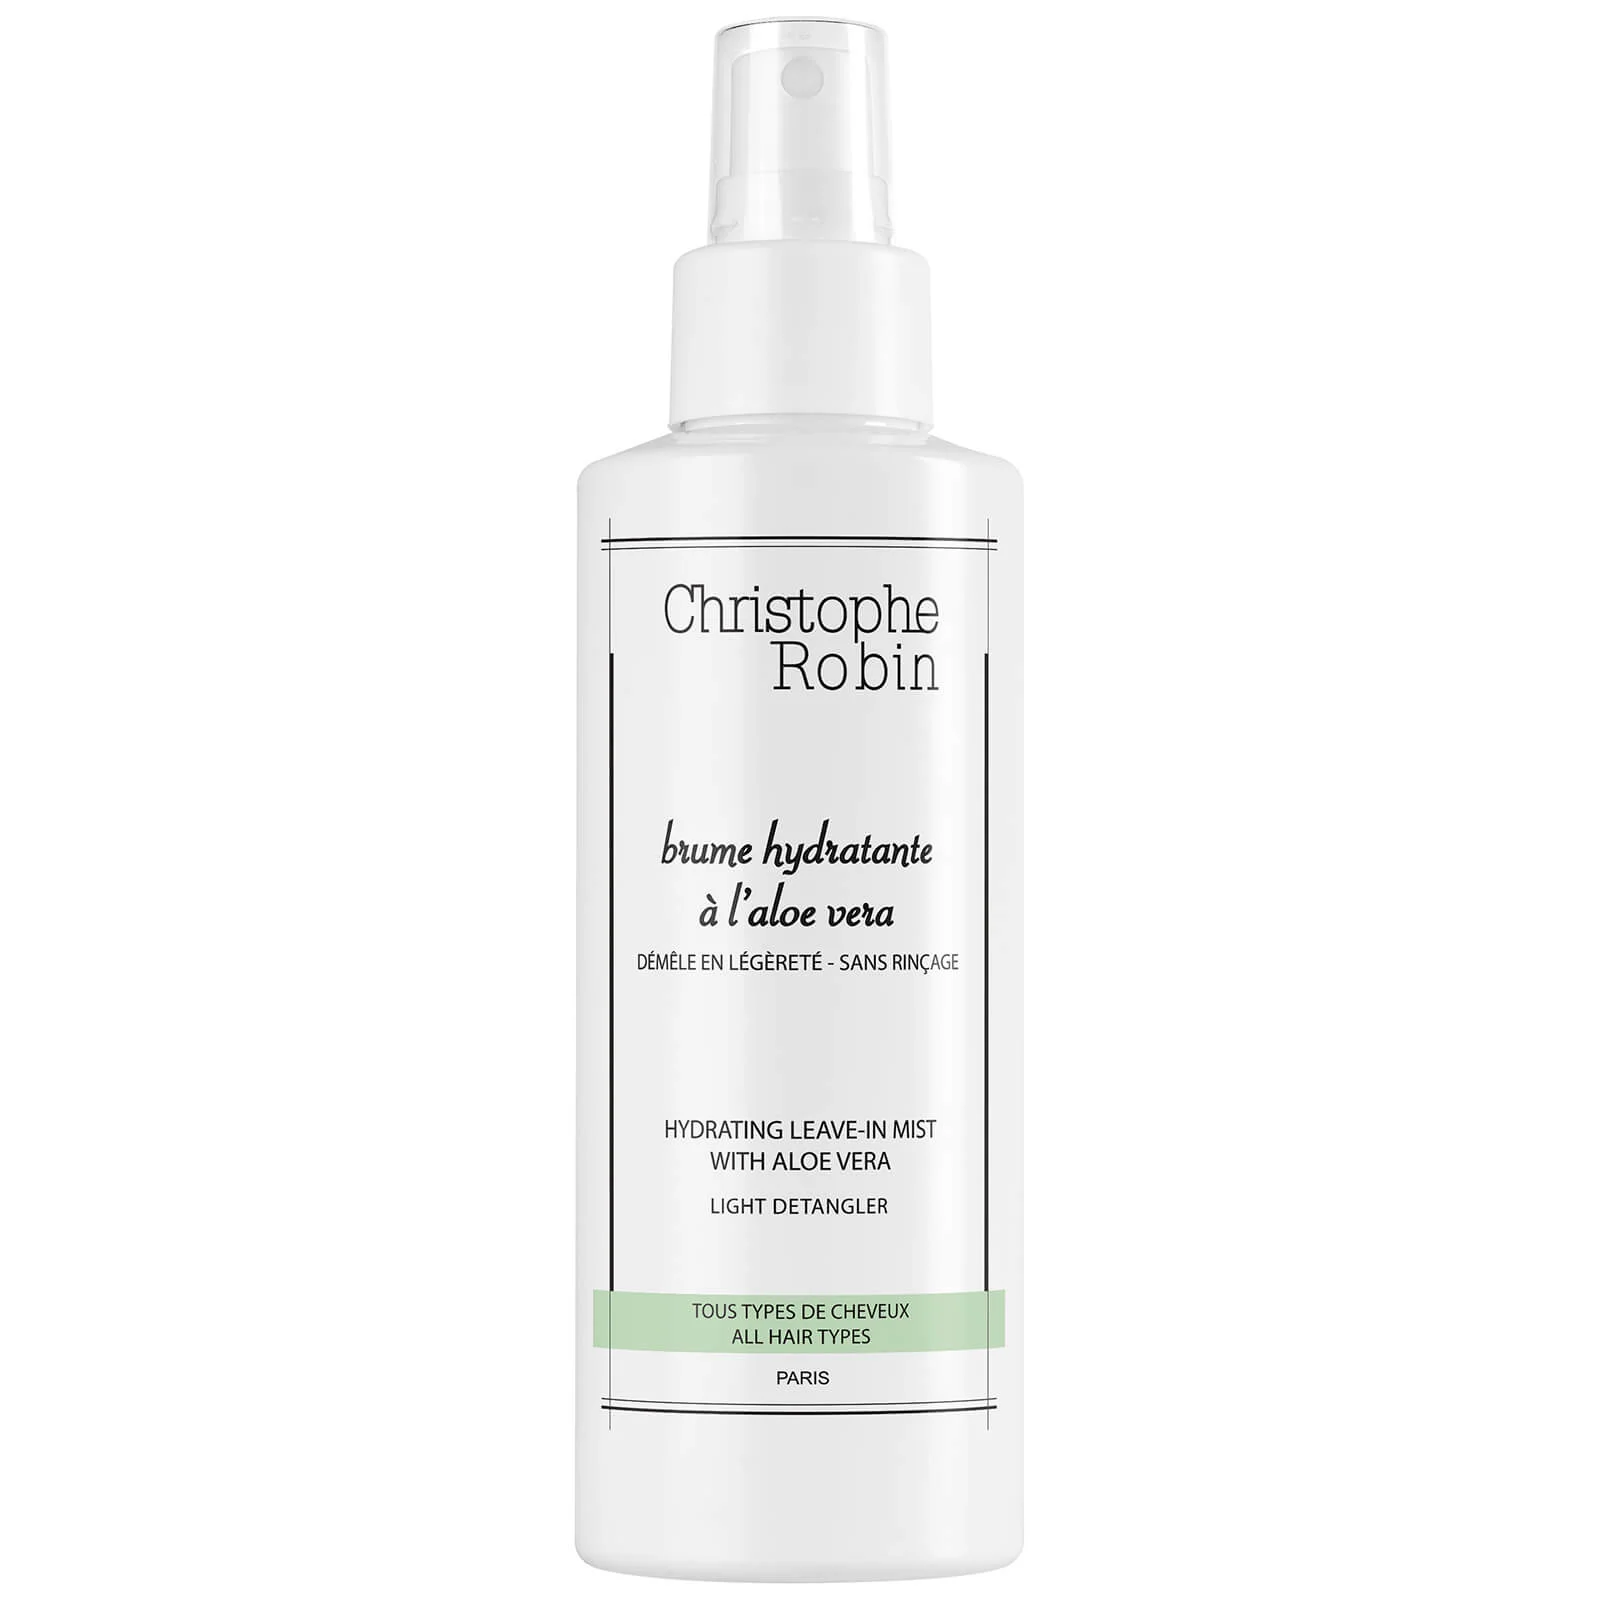 Christophe Robin Hydrating Leave-In Mist with Aloe Vera 150ml Image 1